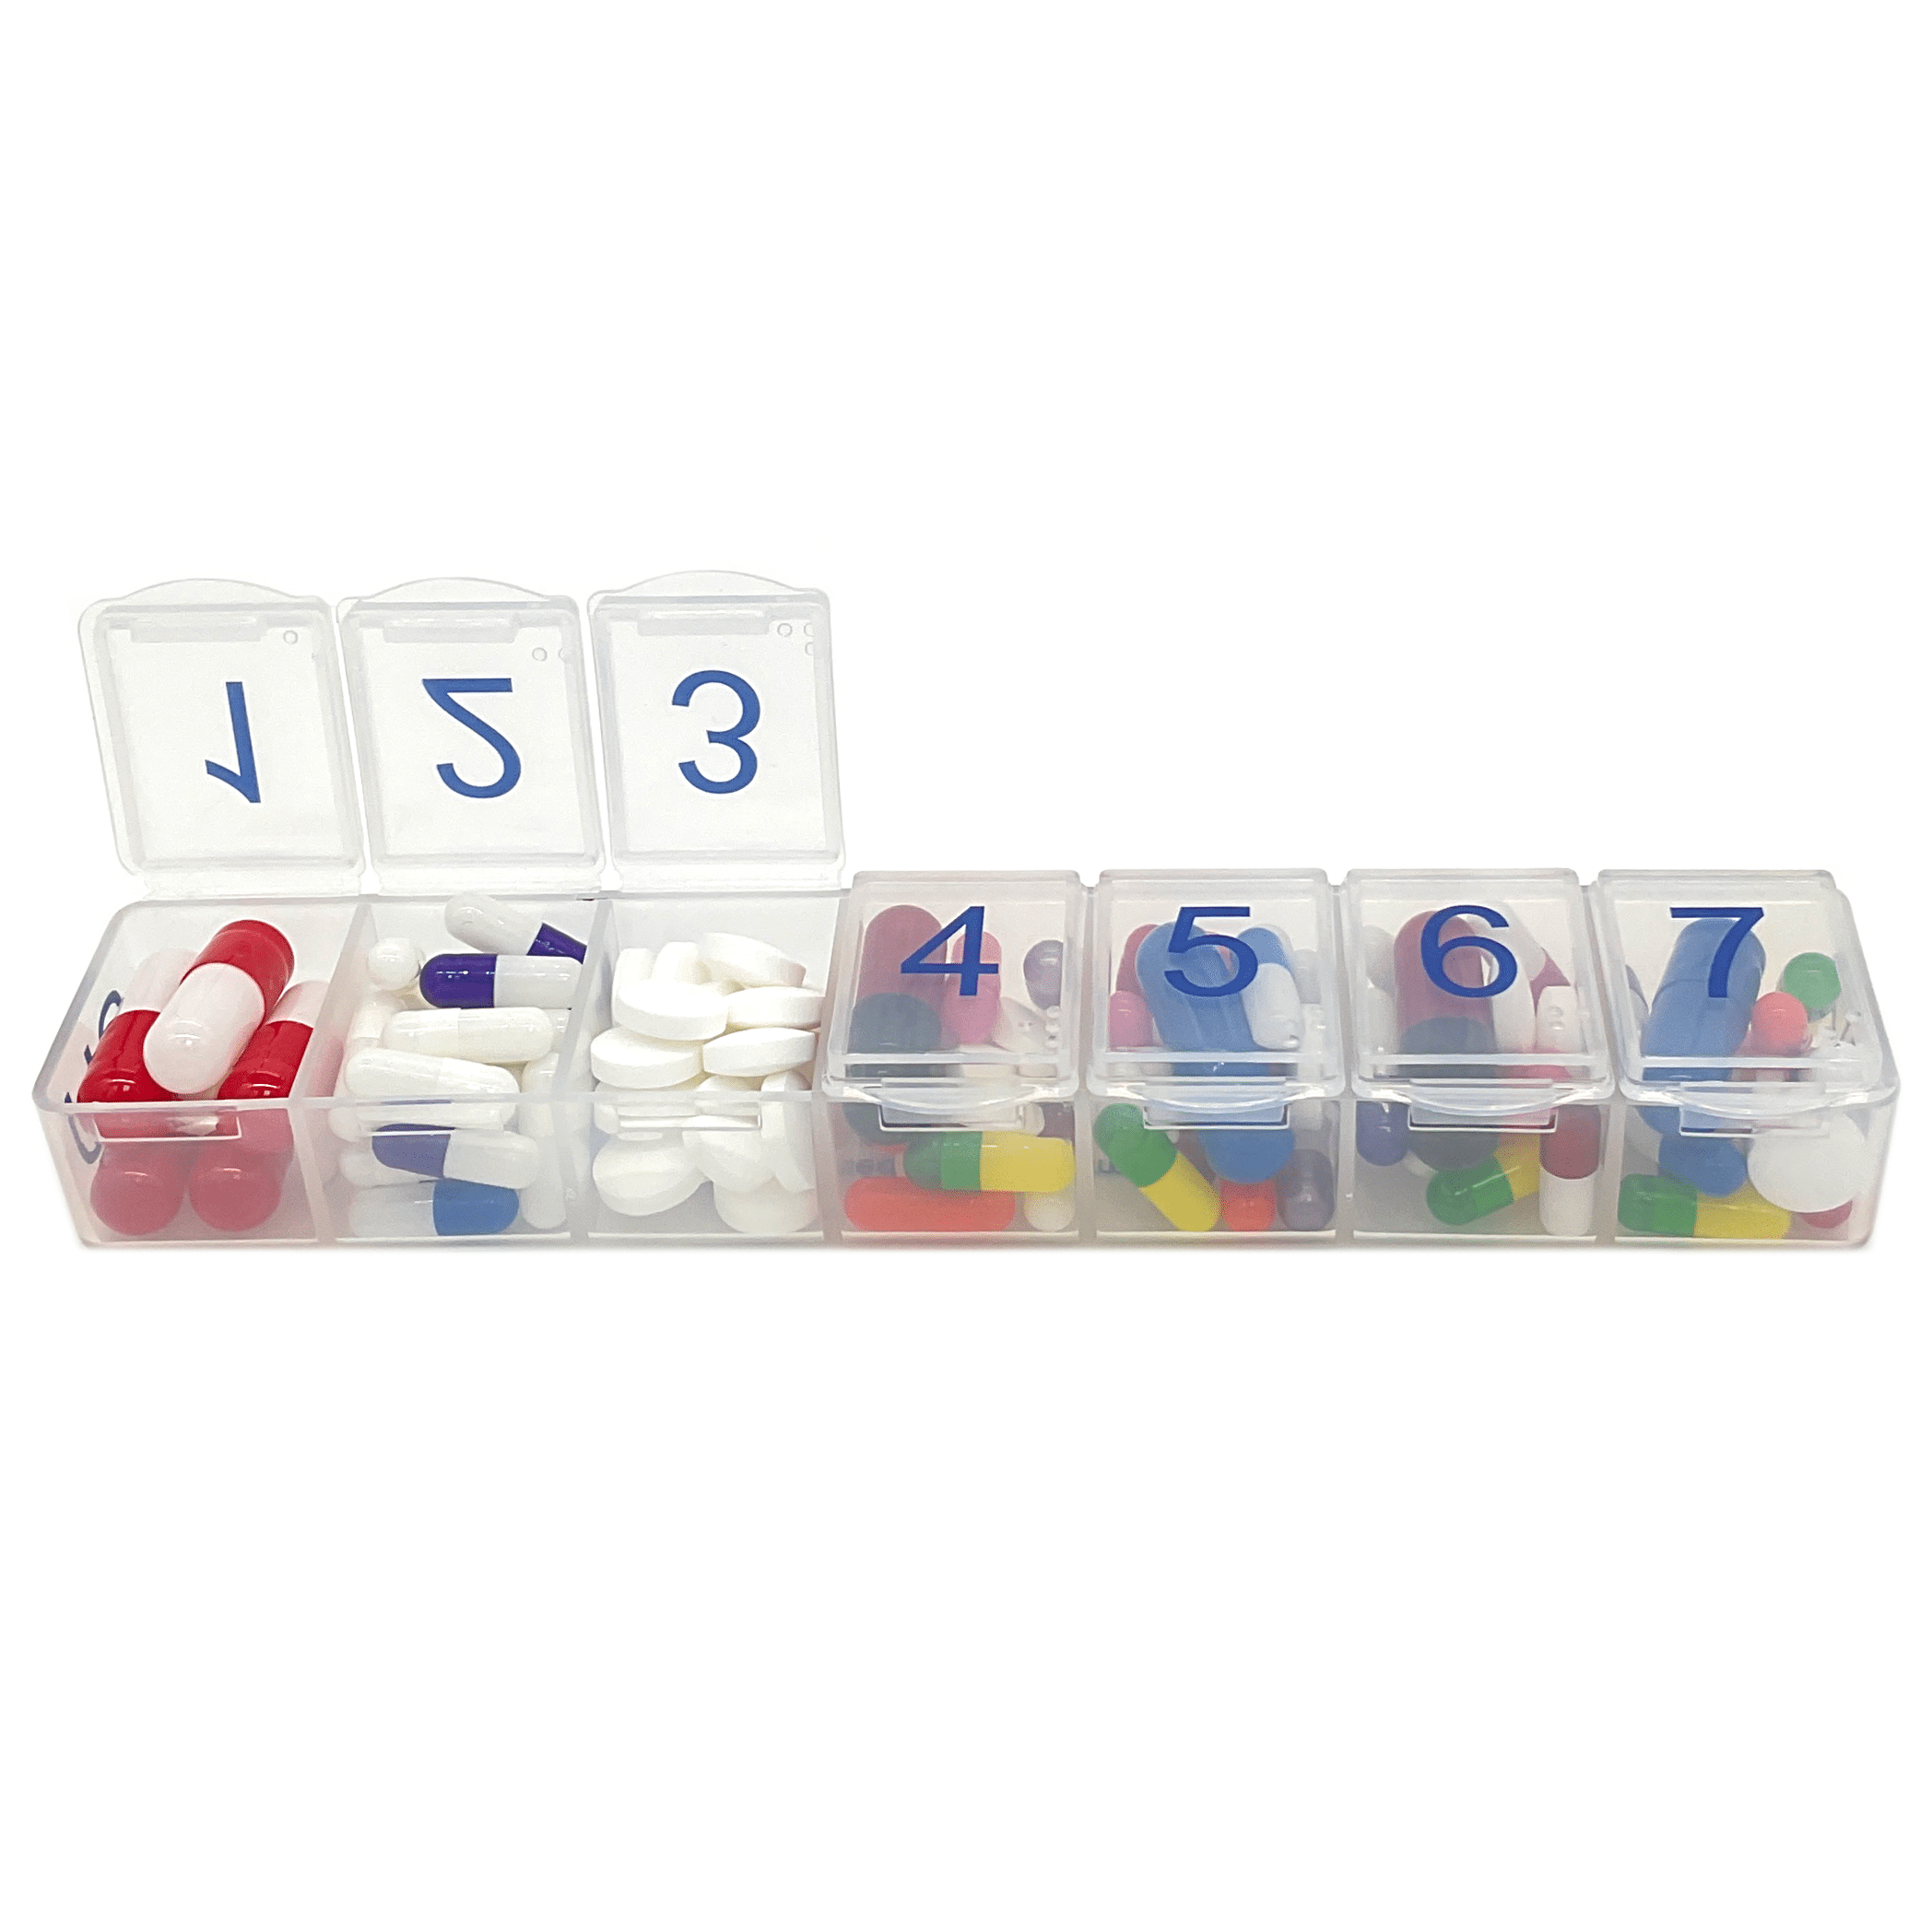 7 Times a Day Weekly Pill Box Organizer Case, Secure 7X Pillbox with M –  Pill Thing